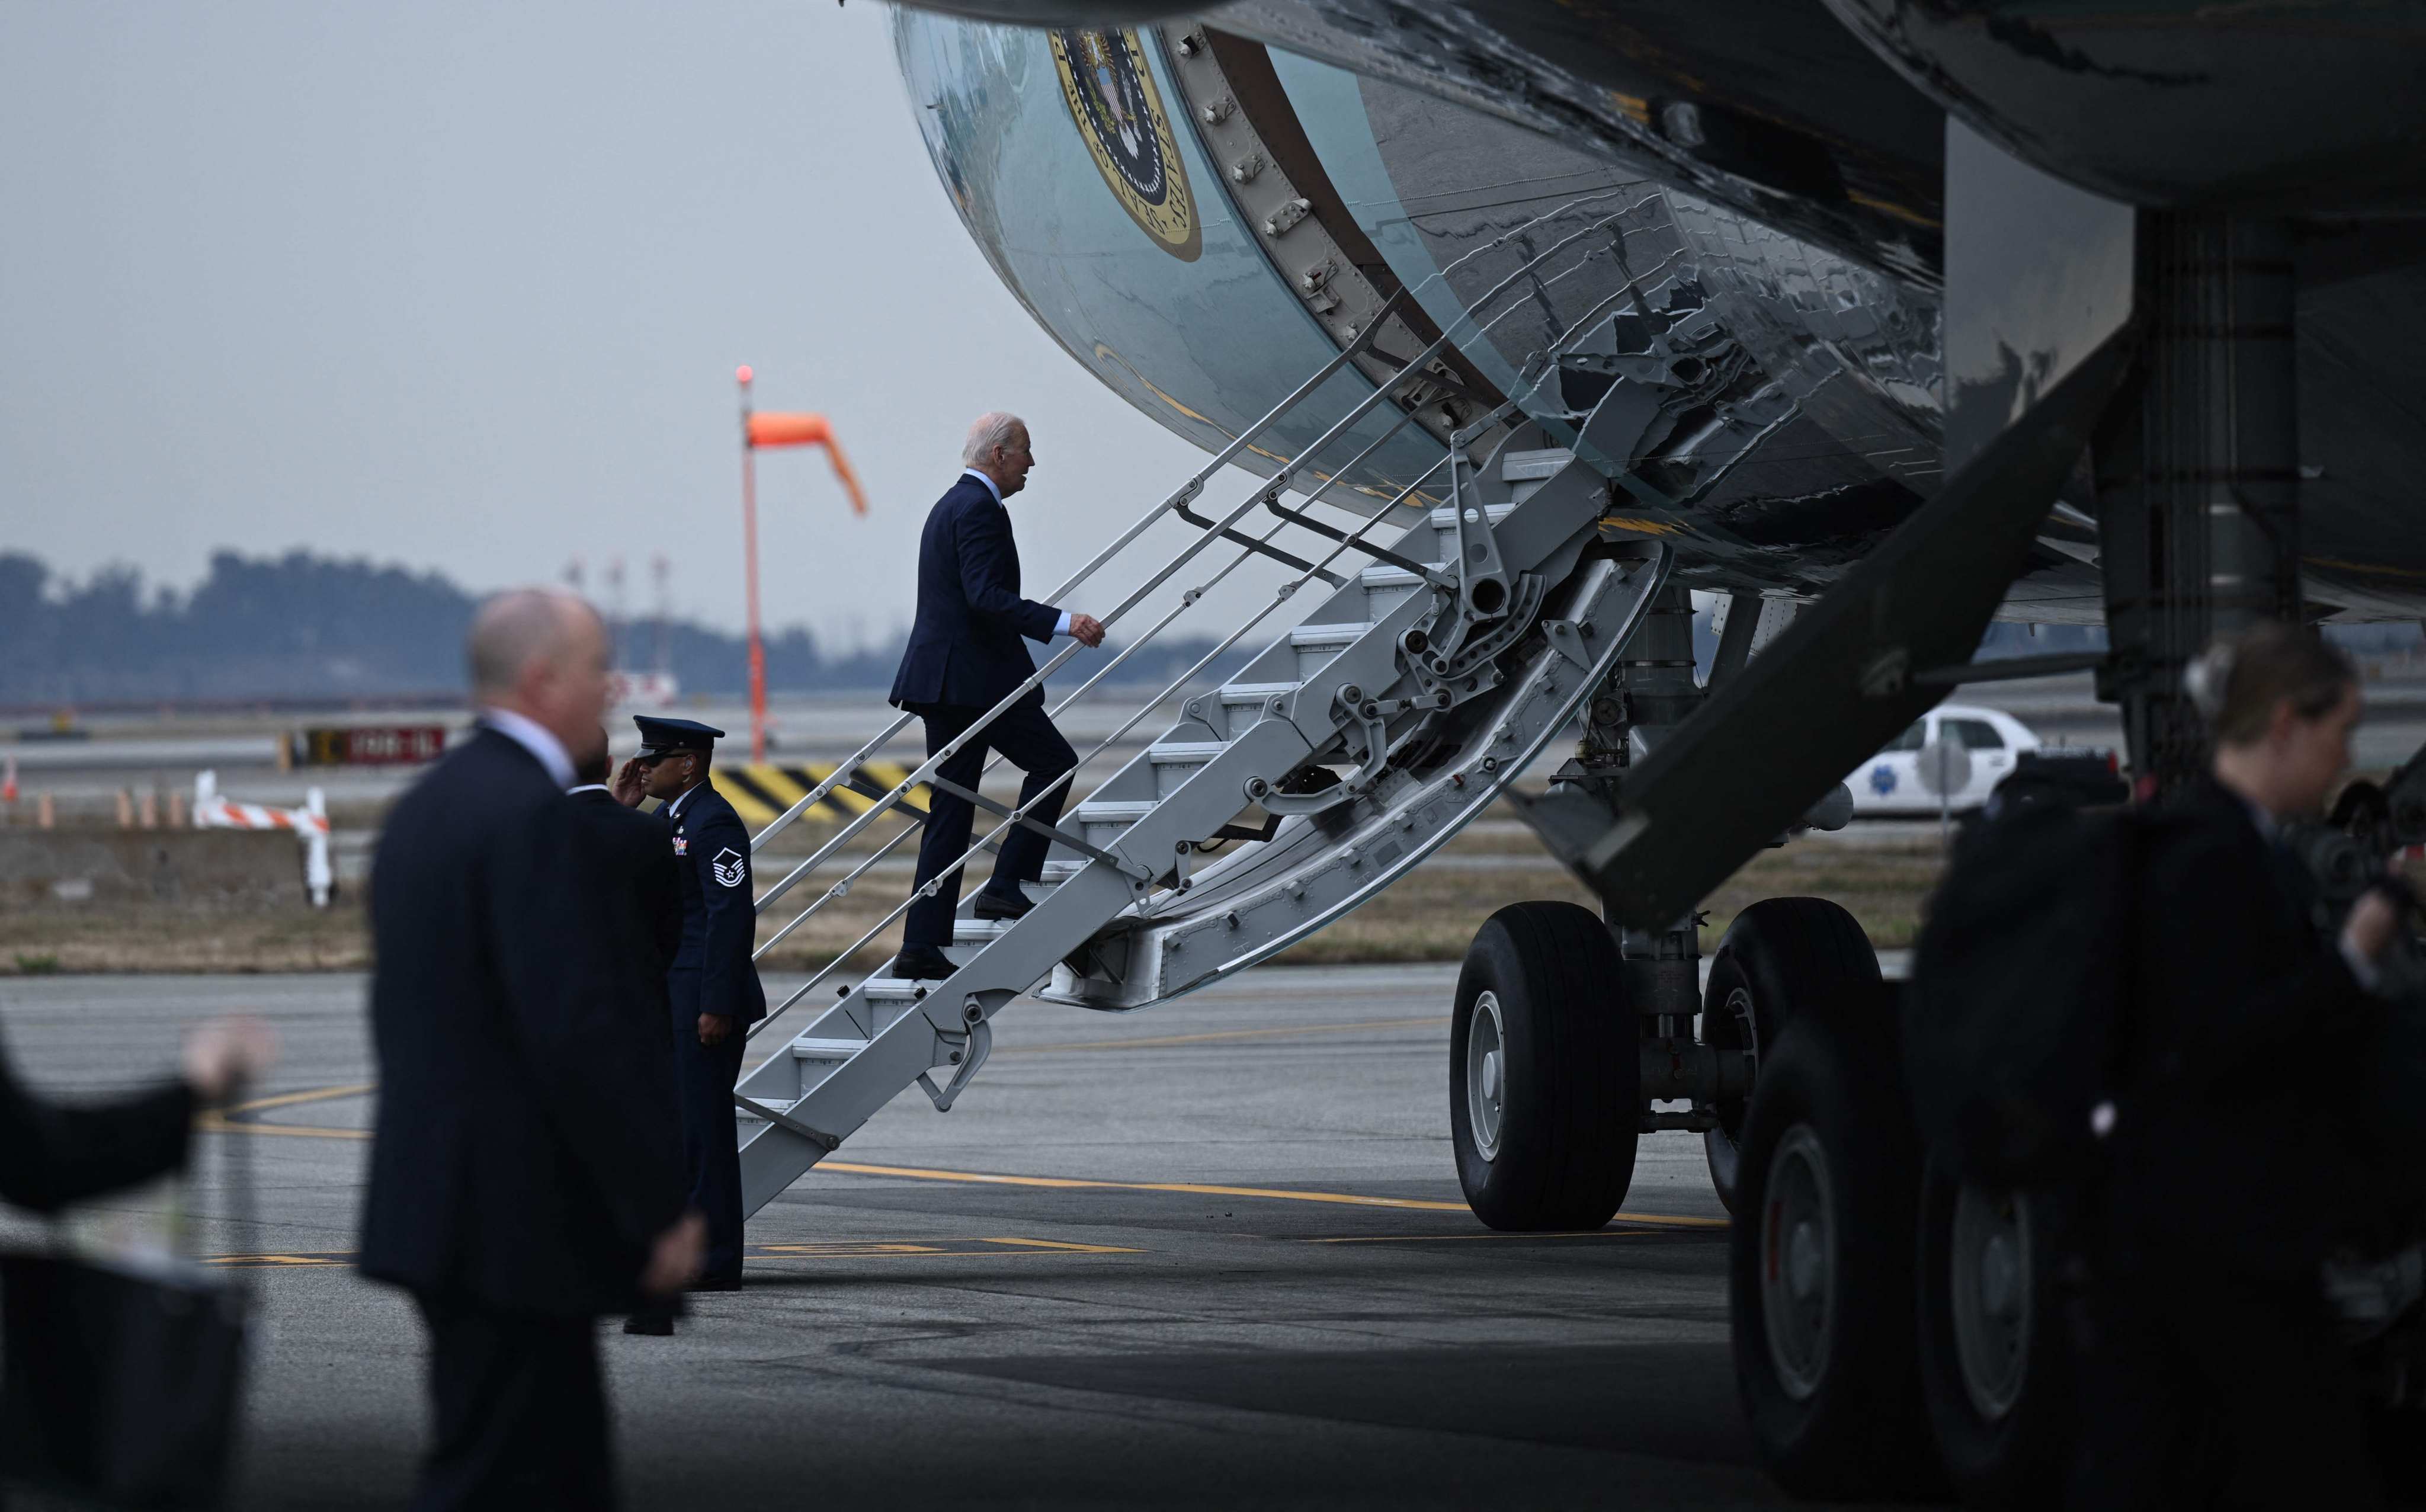 US President Joe Biden boards Air Force One at San Francisco International Airport on Friday after attending the Asia-Pacific Economic Cooperation summit. Photo: AFP